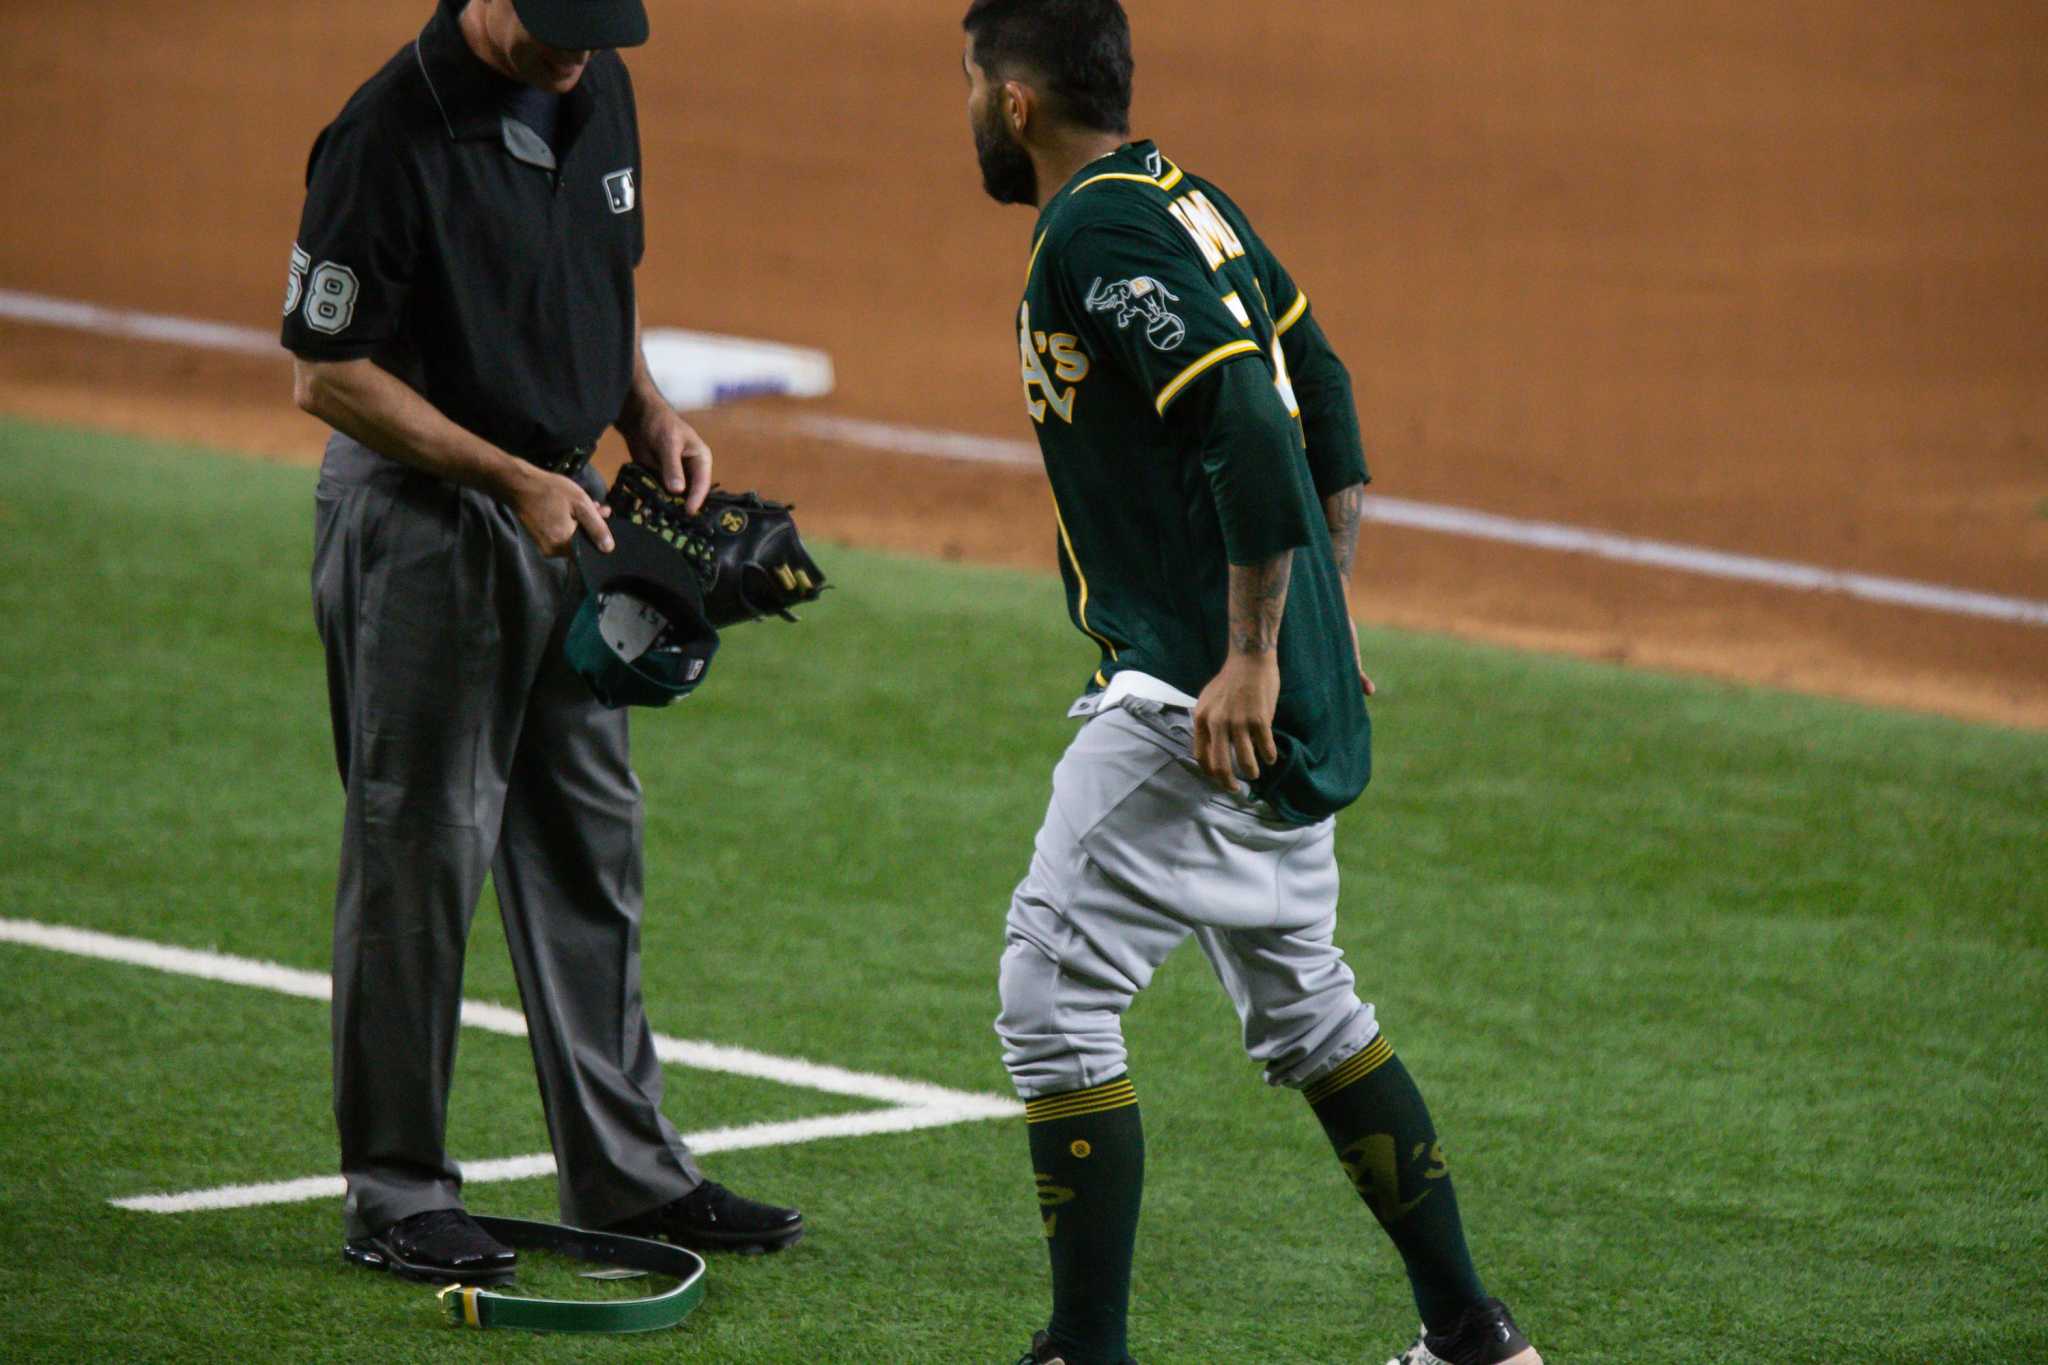 A's reliever Sergio Romo explains dropping pants during foreign